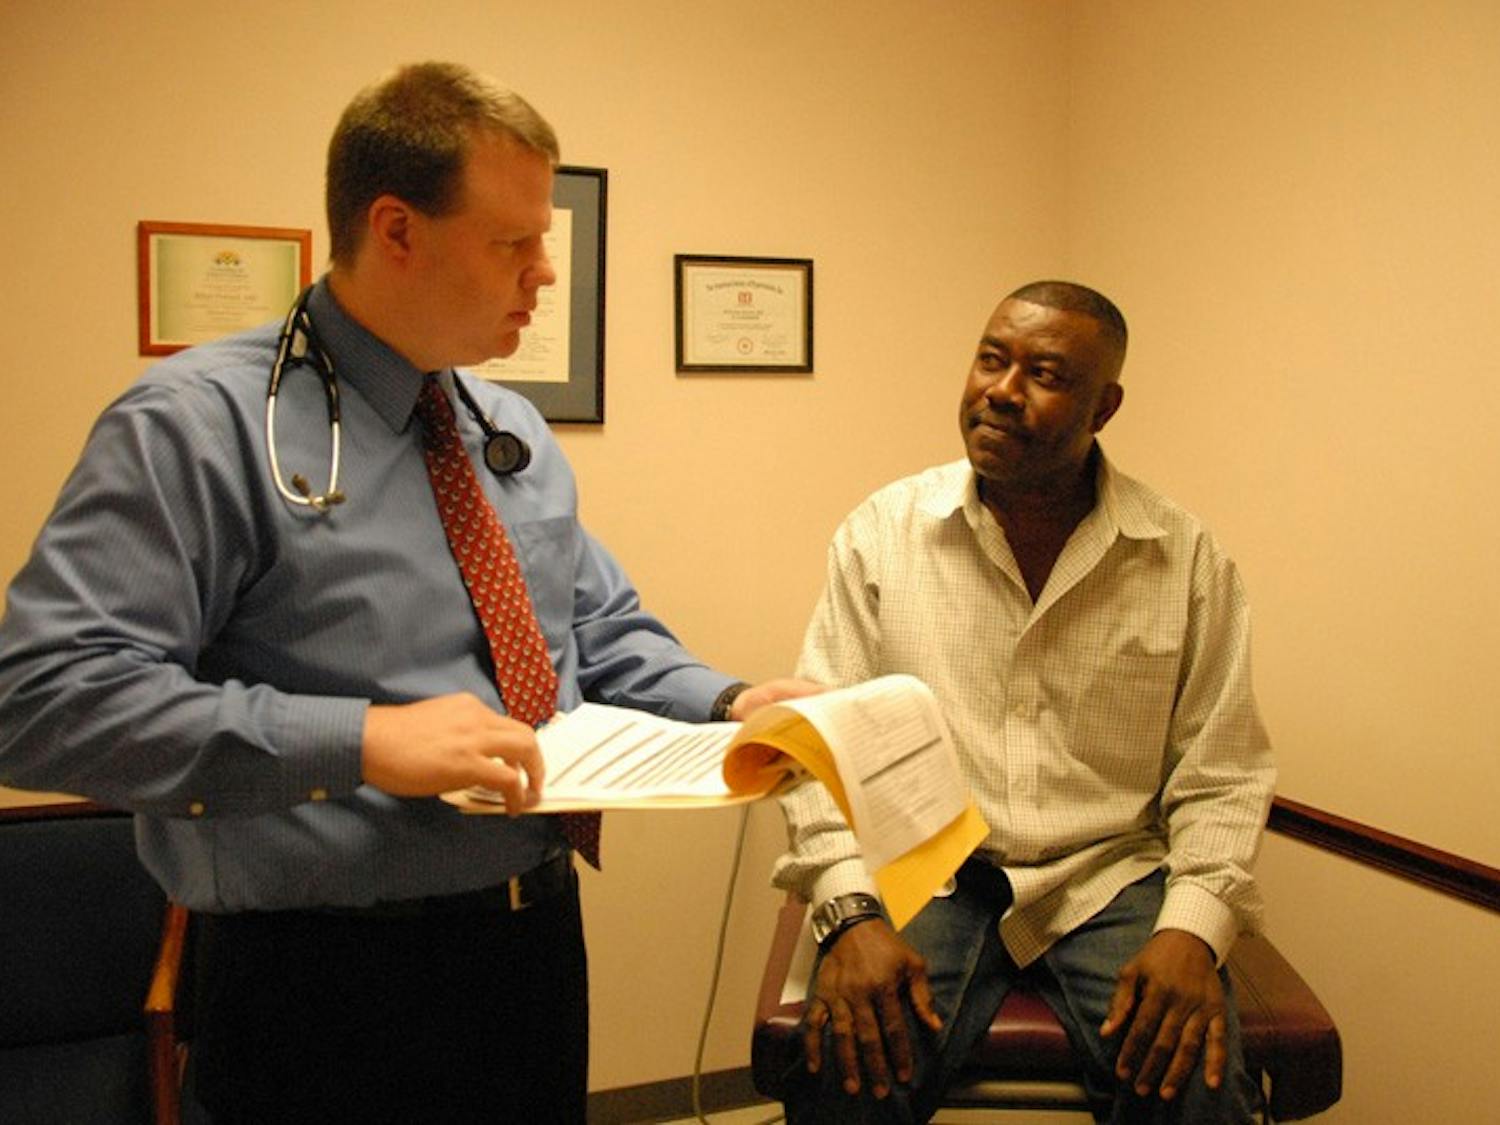 Dr. Brian Forrest informs his patient Franklin Torere of his results after a physical. DTH/Helen Woolard